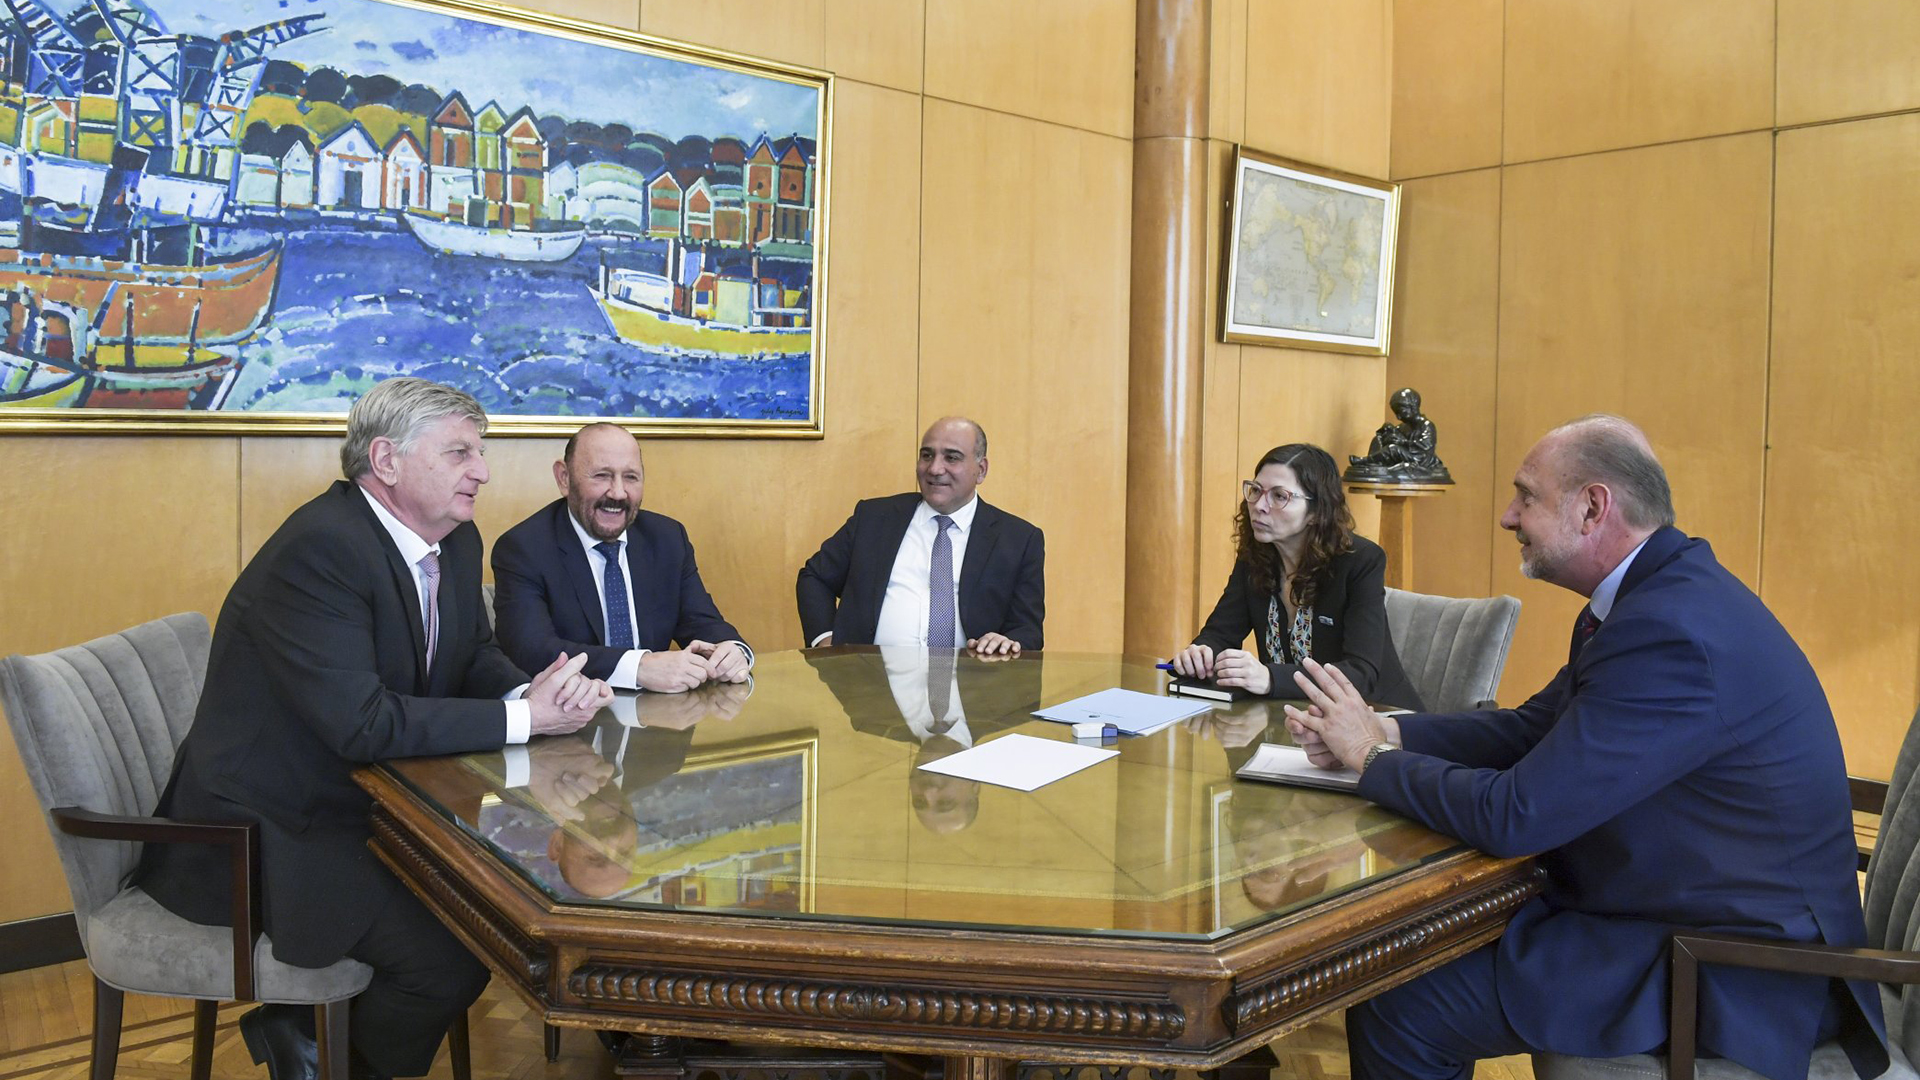 Silvina Batakis, with Juan Manzur and governors, in search of political support